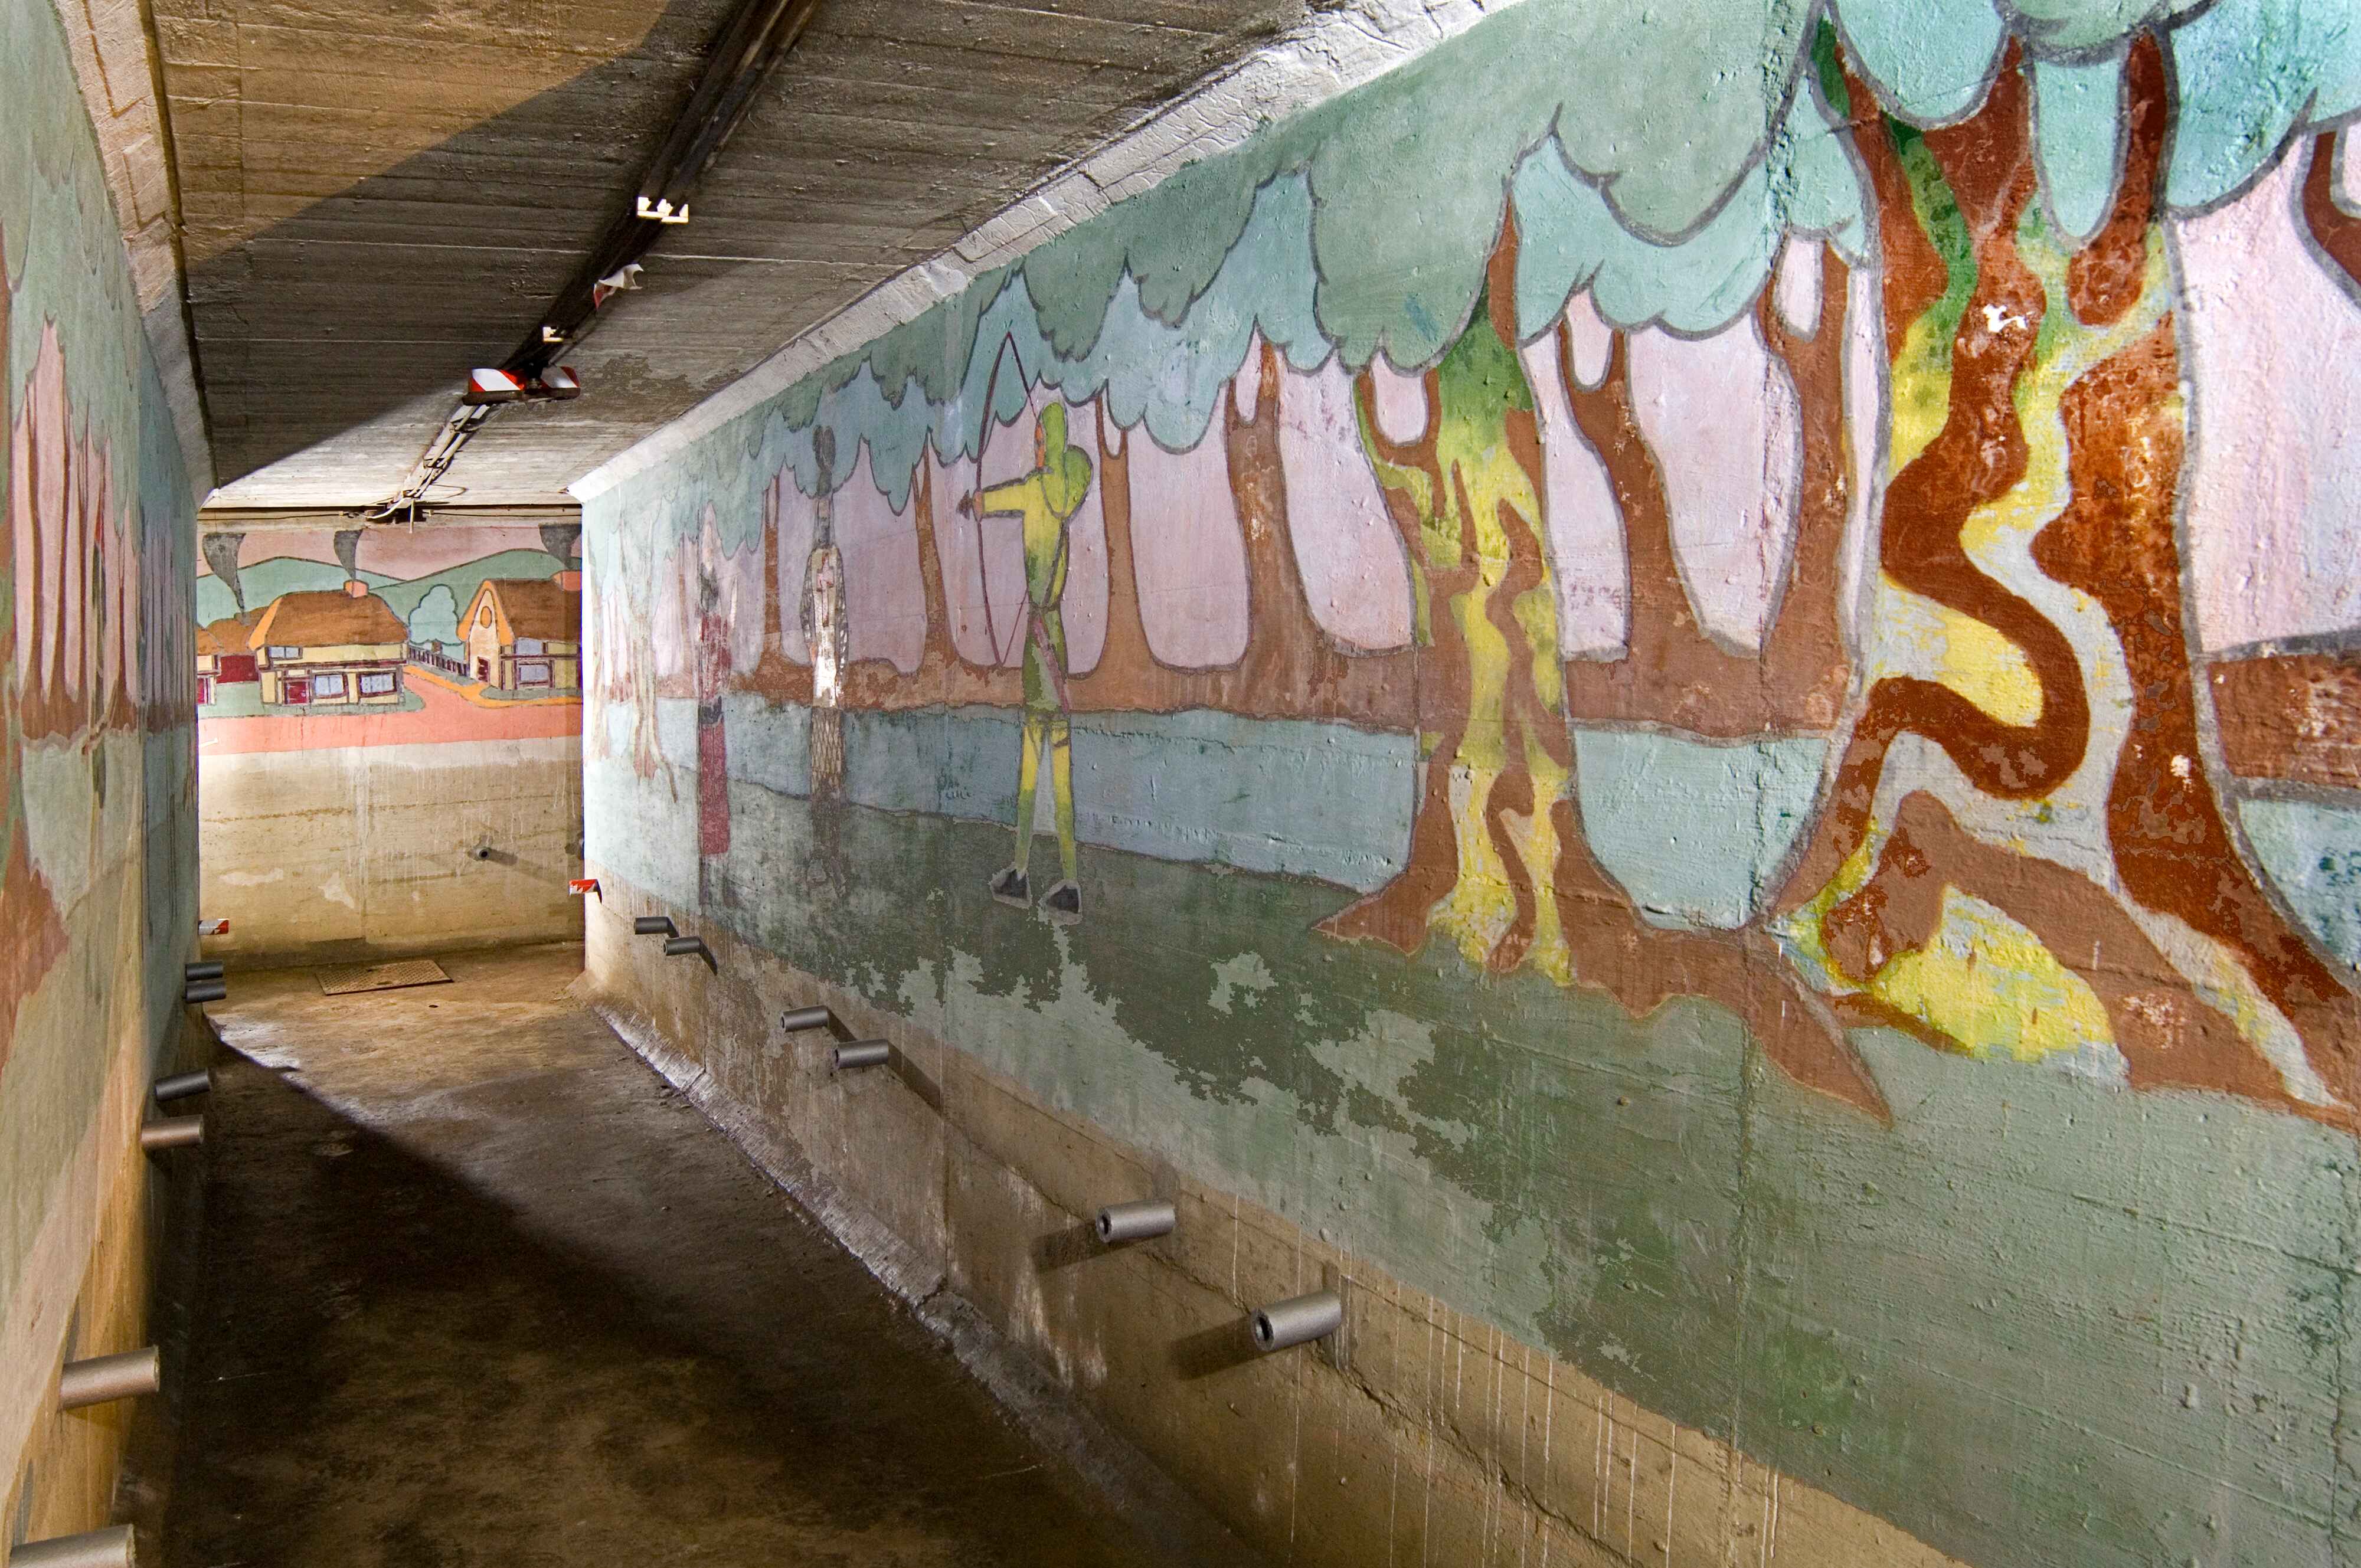 Murals on wall. On the right is a scene from Robin Hood.